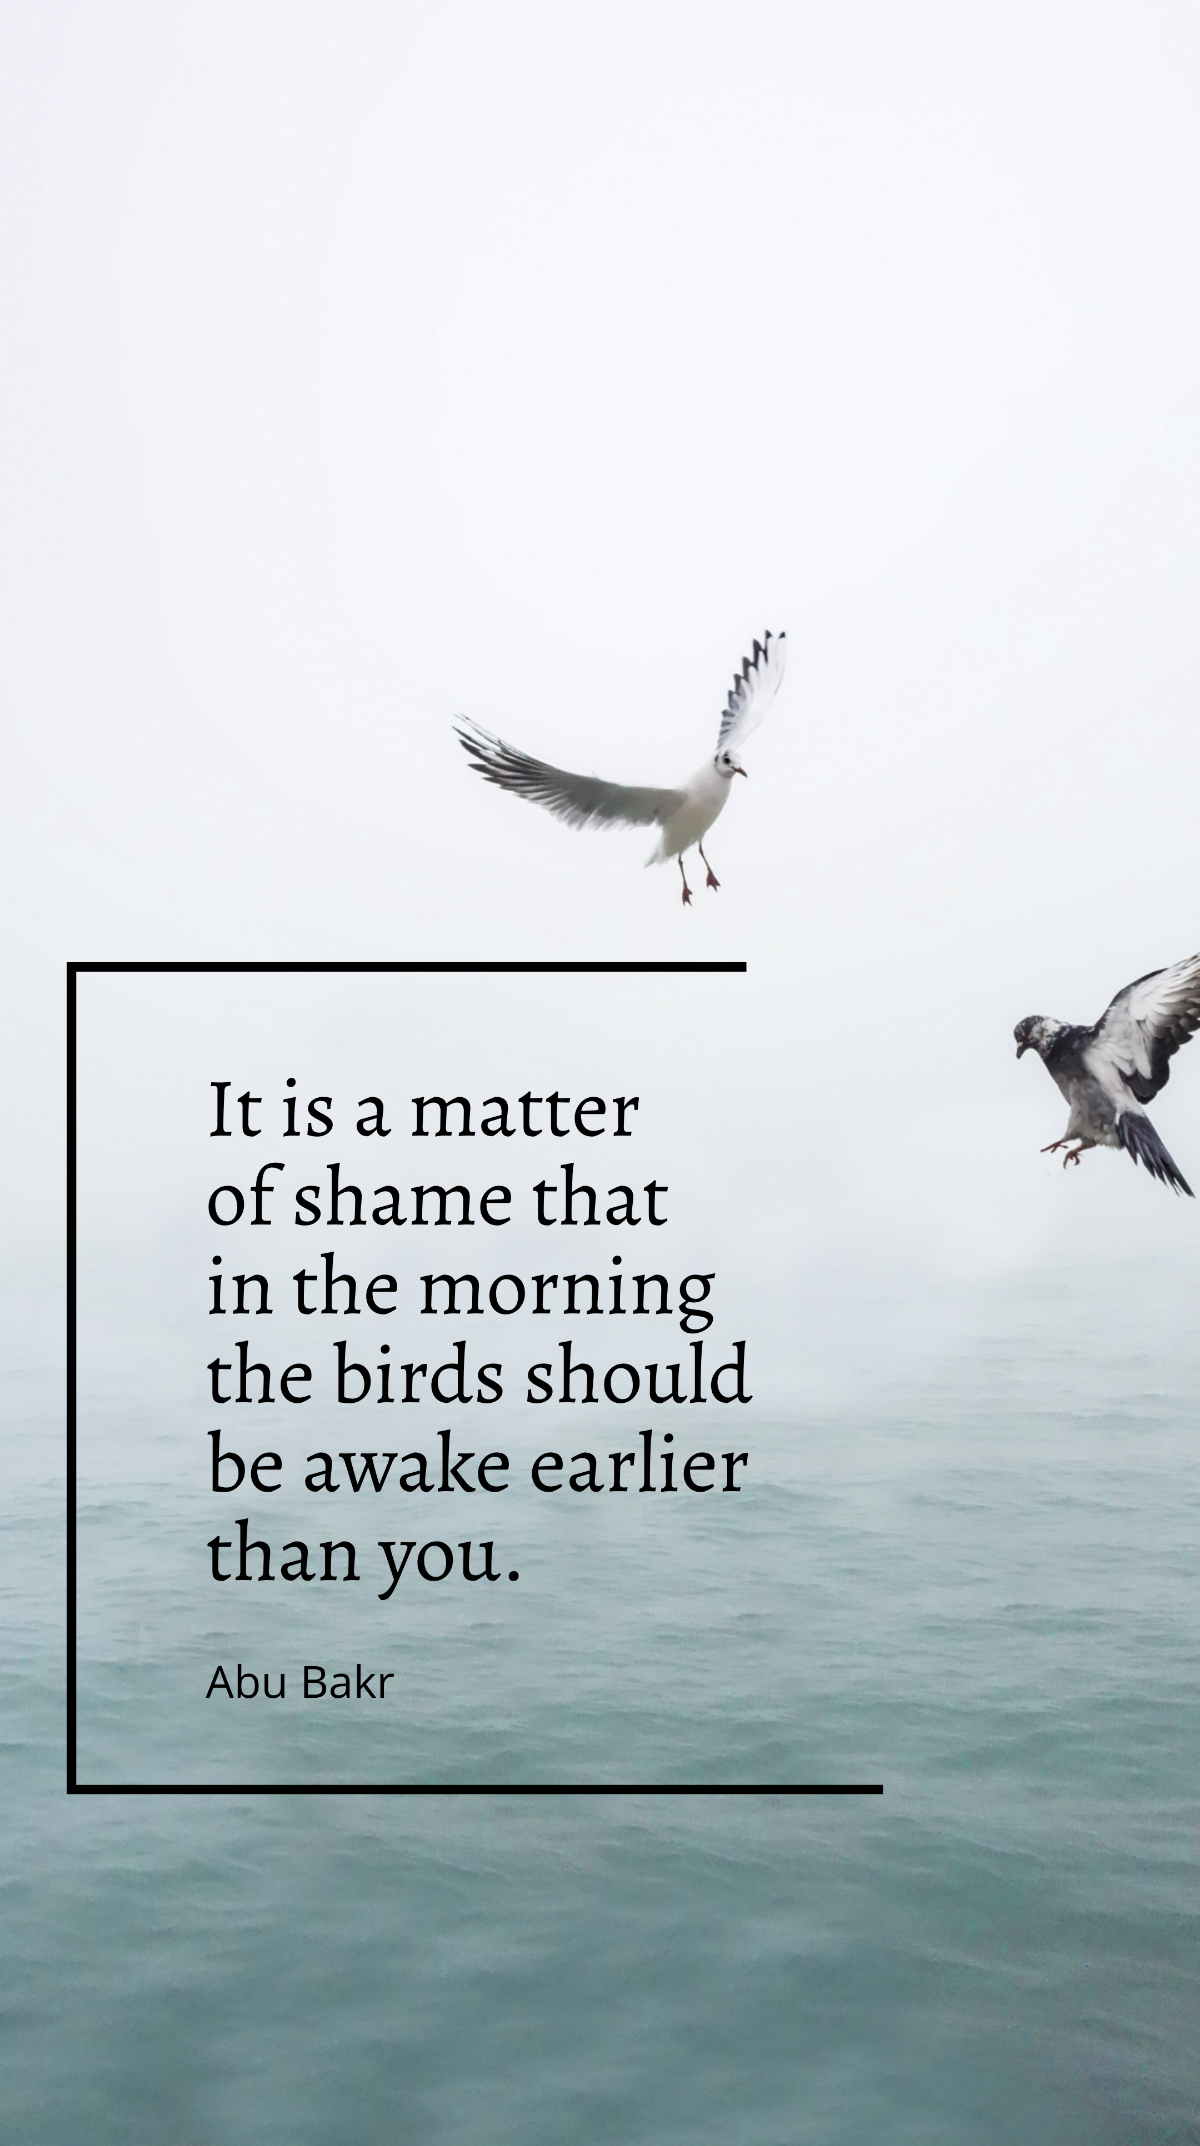 Abu Bakr - It is a matter of shame that in the morning the birds should be awake earlier than you. Template